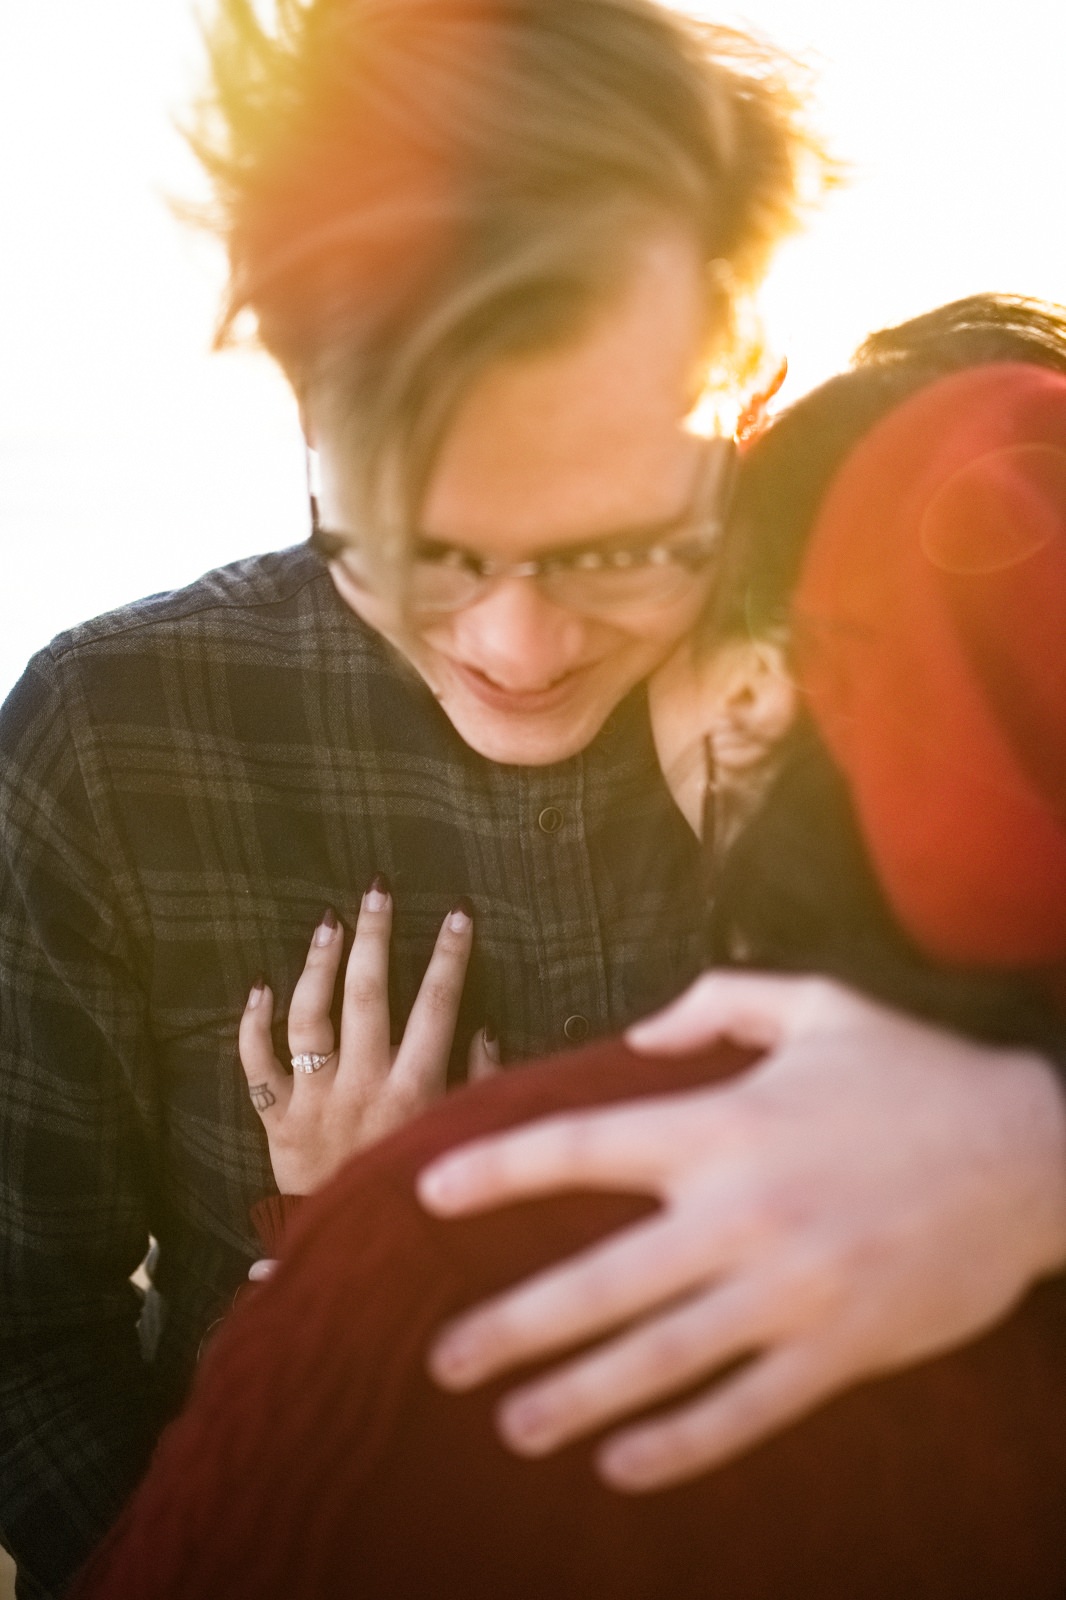 man with glasses on hugging woman with red hat